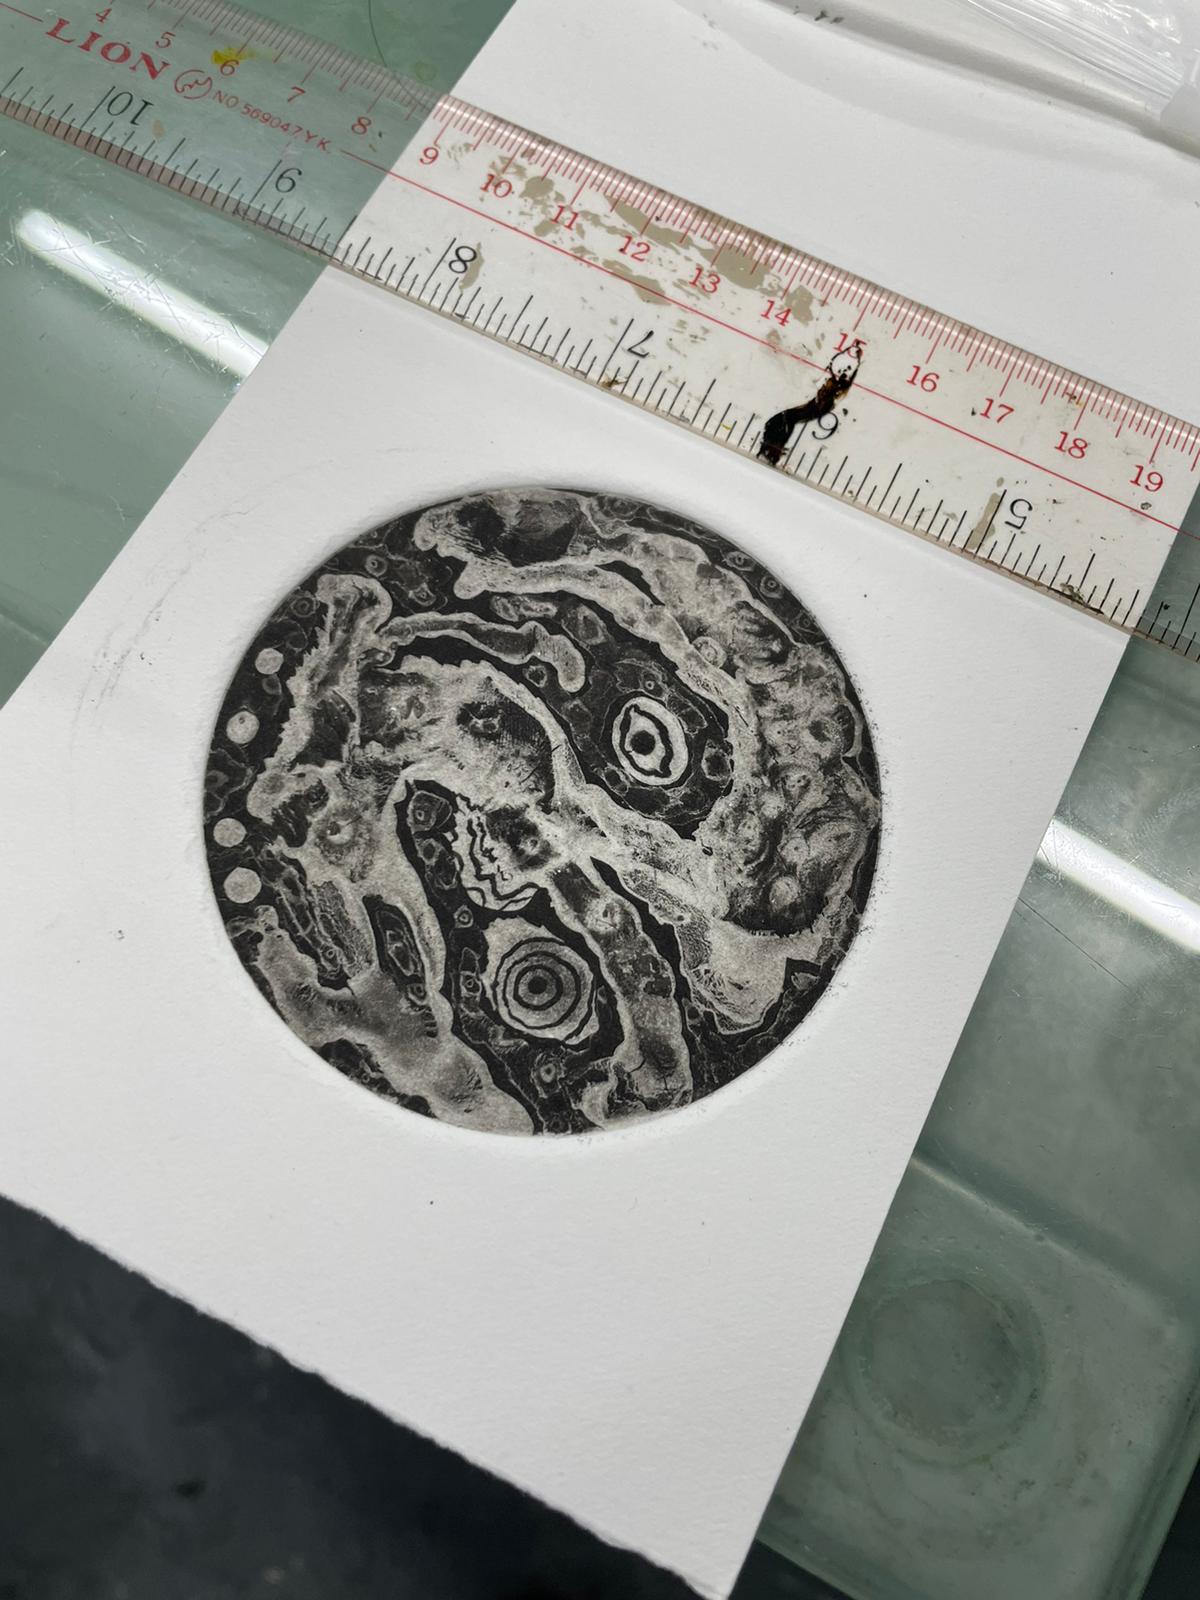 3 level repeating Copper Etching Masterclass Course with Erika Shiba